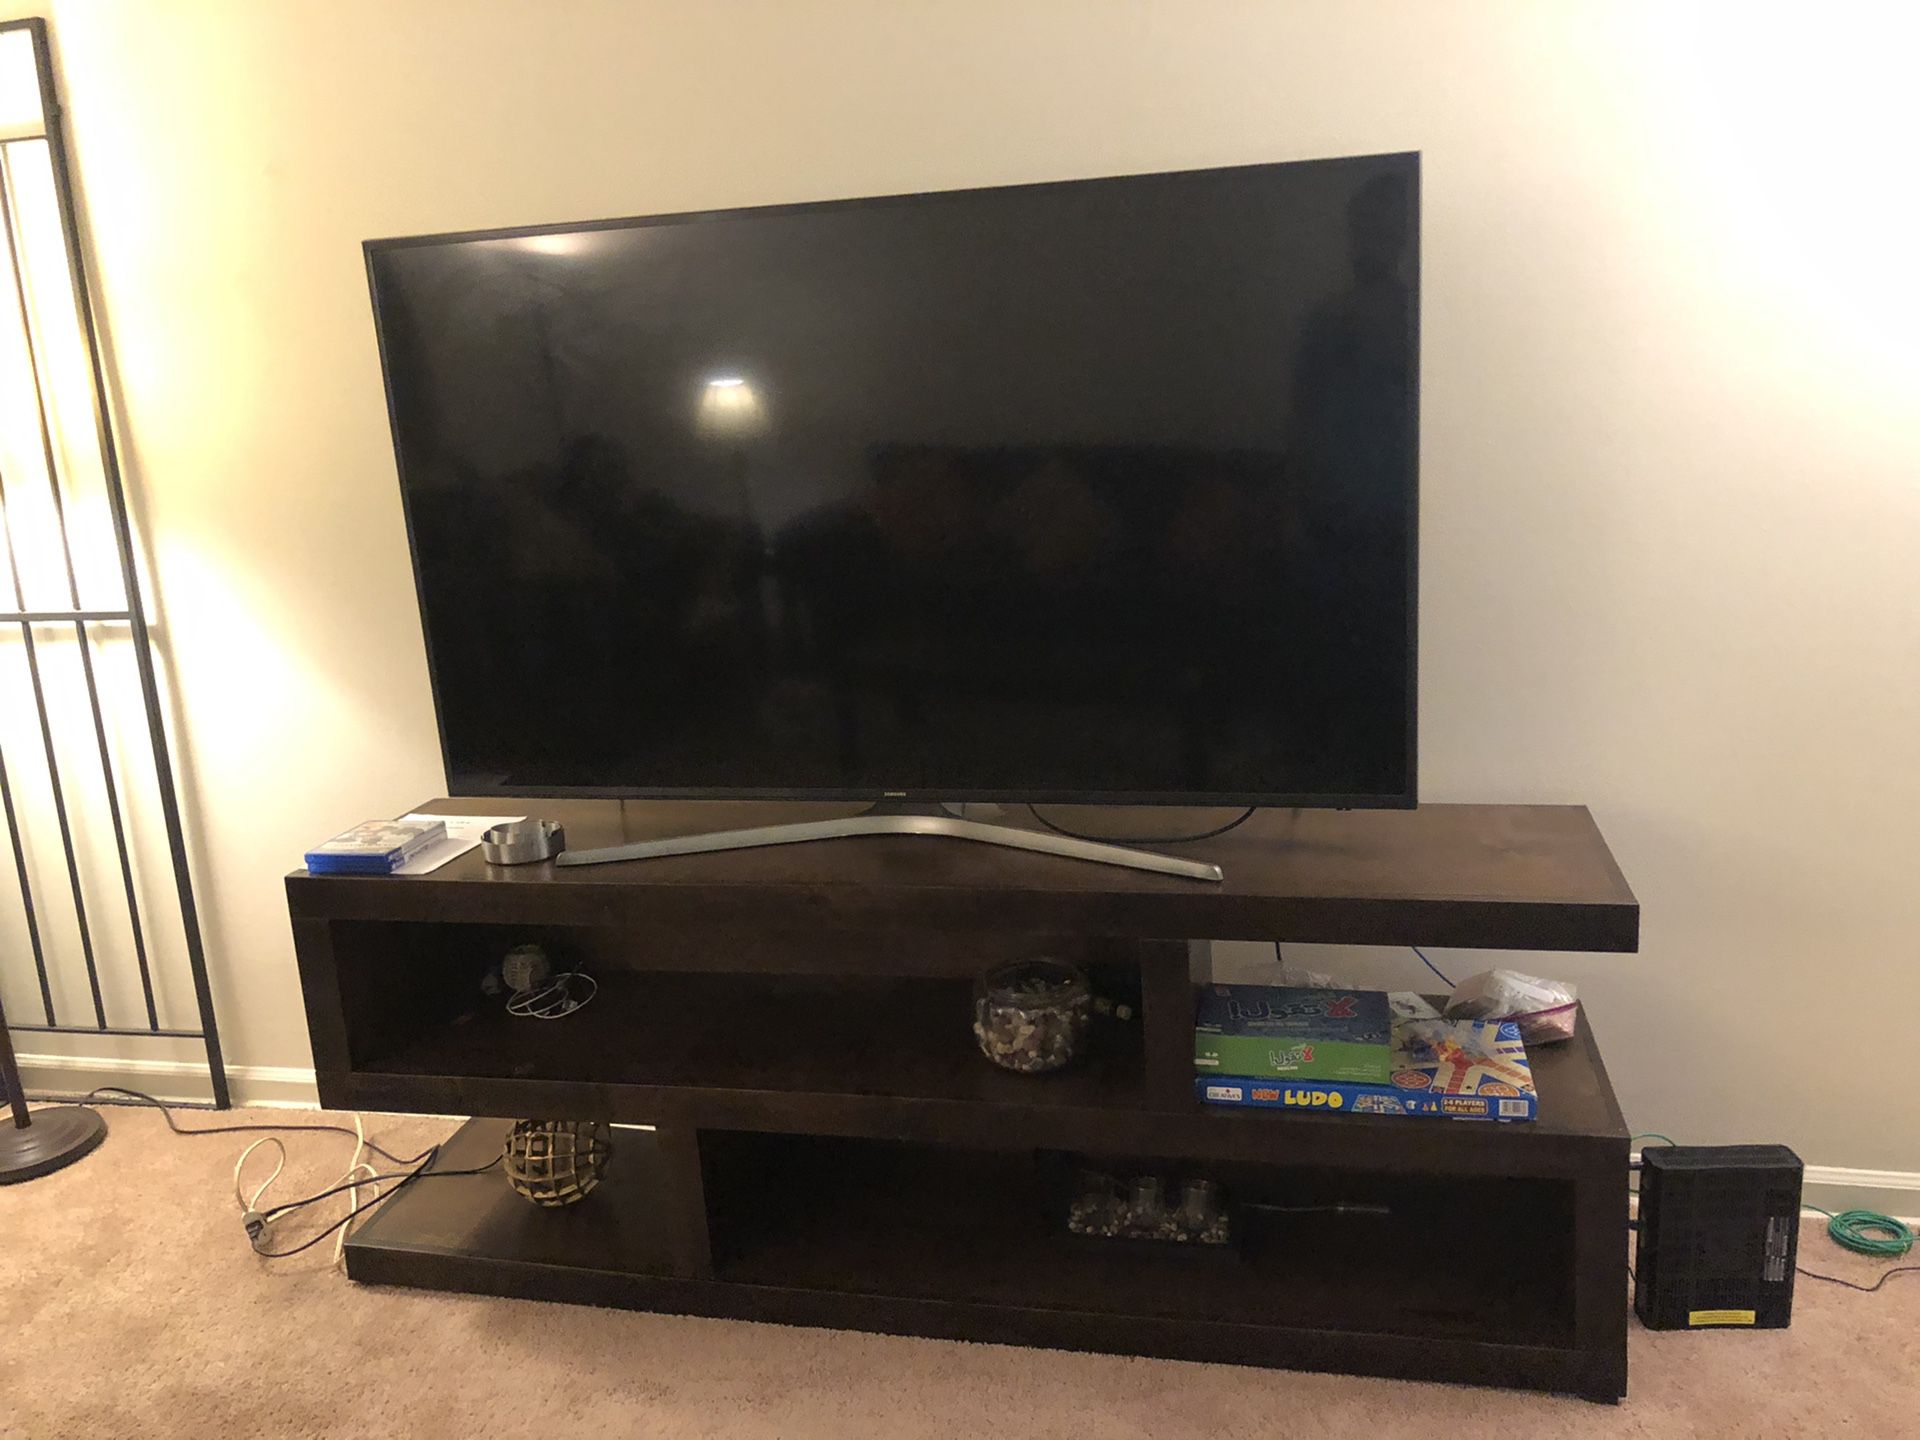 65” Samsung Smart TV with it’s large stand. Asap!